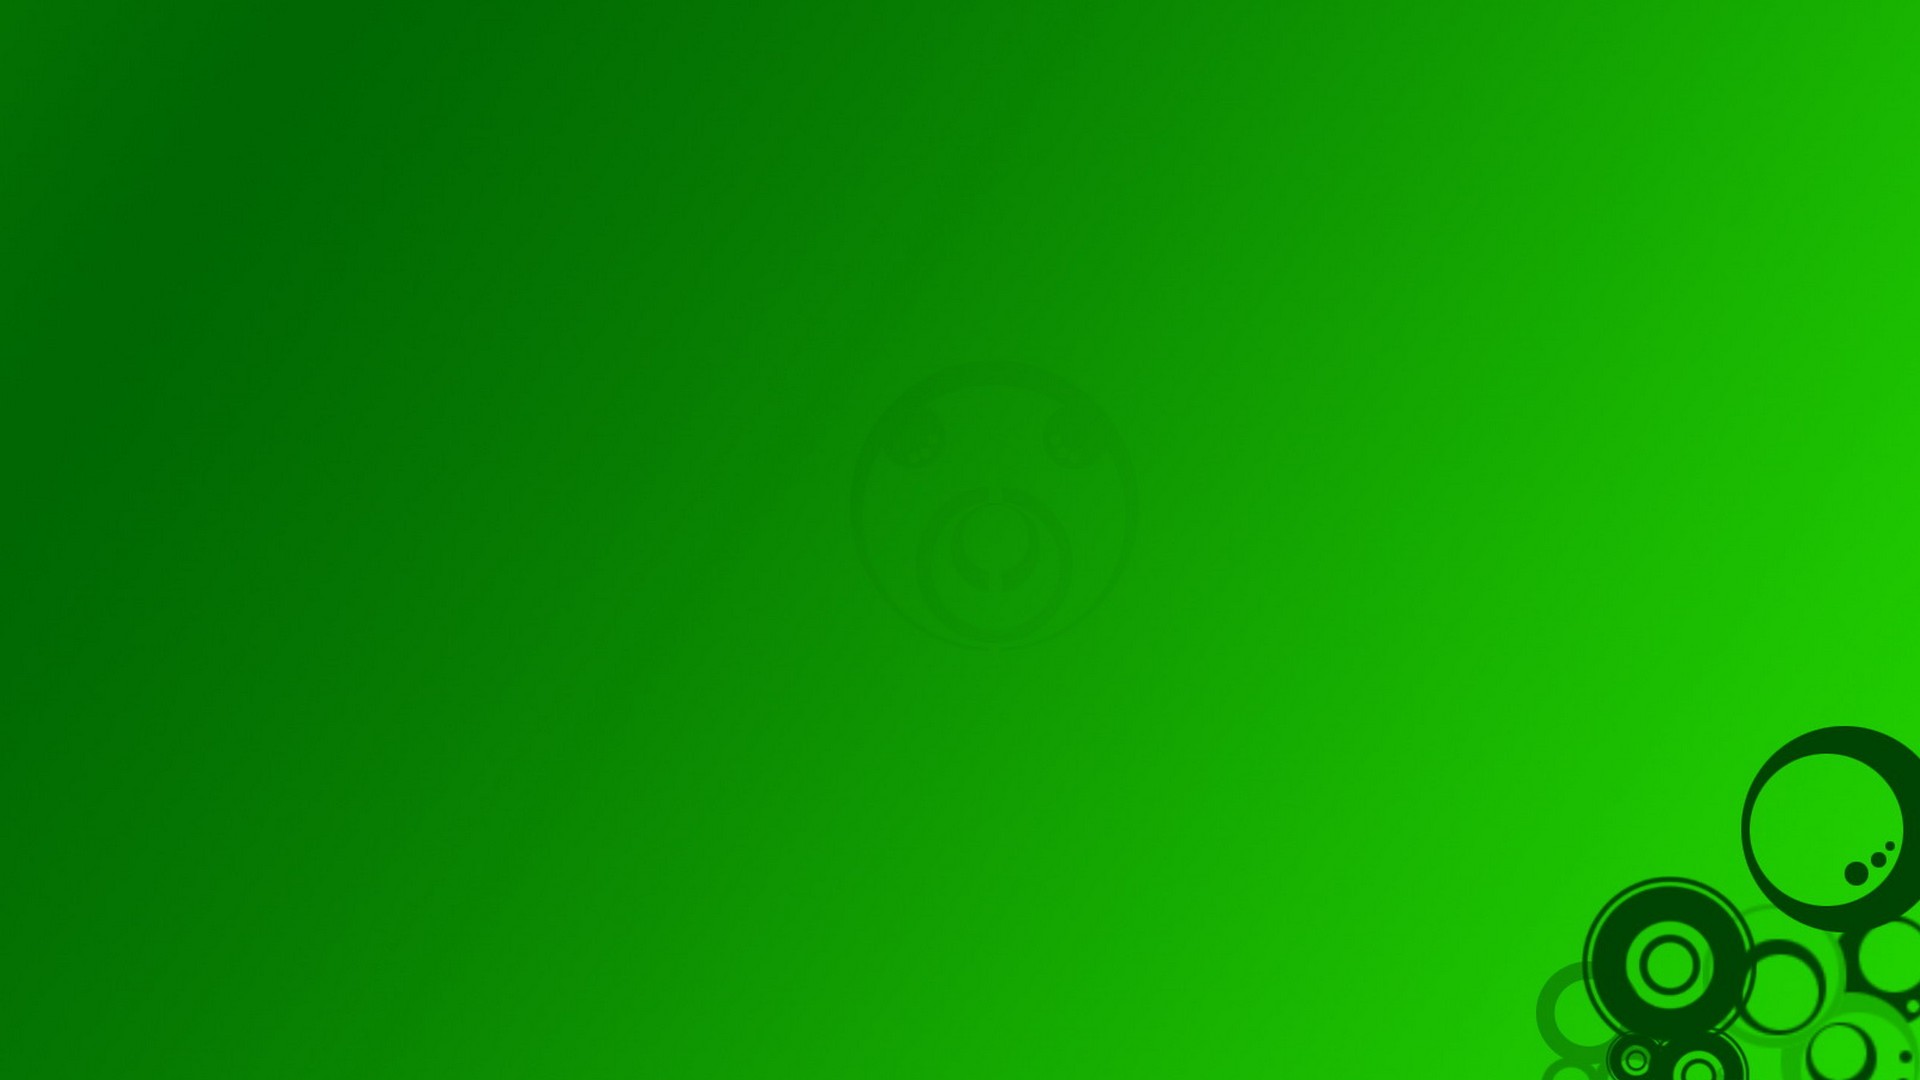 Green Desktop Backgrounds HD with image resolution 1920x1080 pixel. You can use this wallpaper as background for your desktop Computer Screensavers, Android or iPhone smartphones